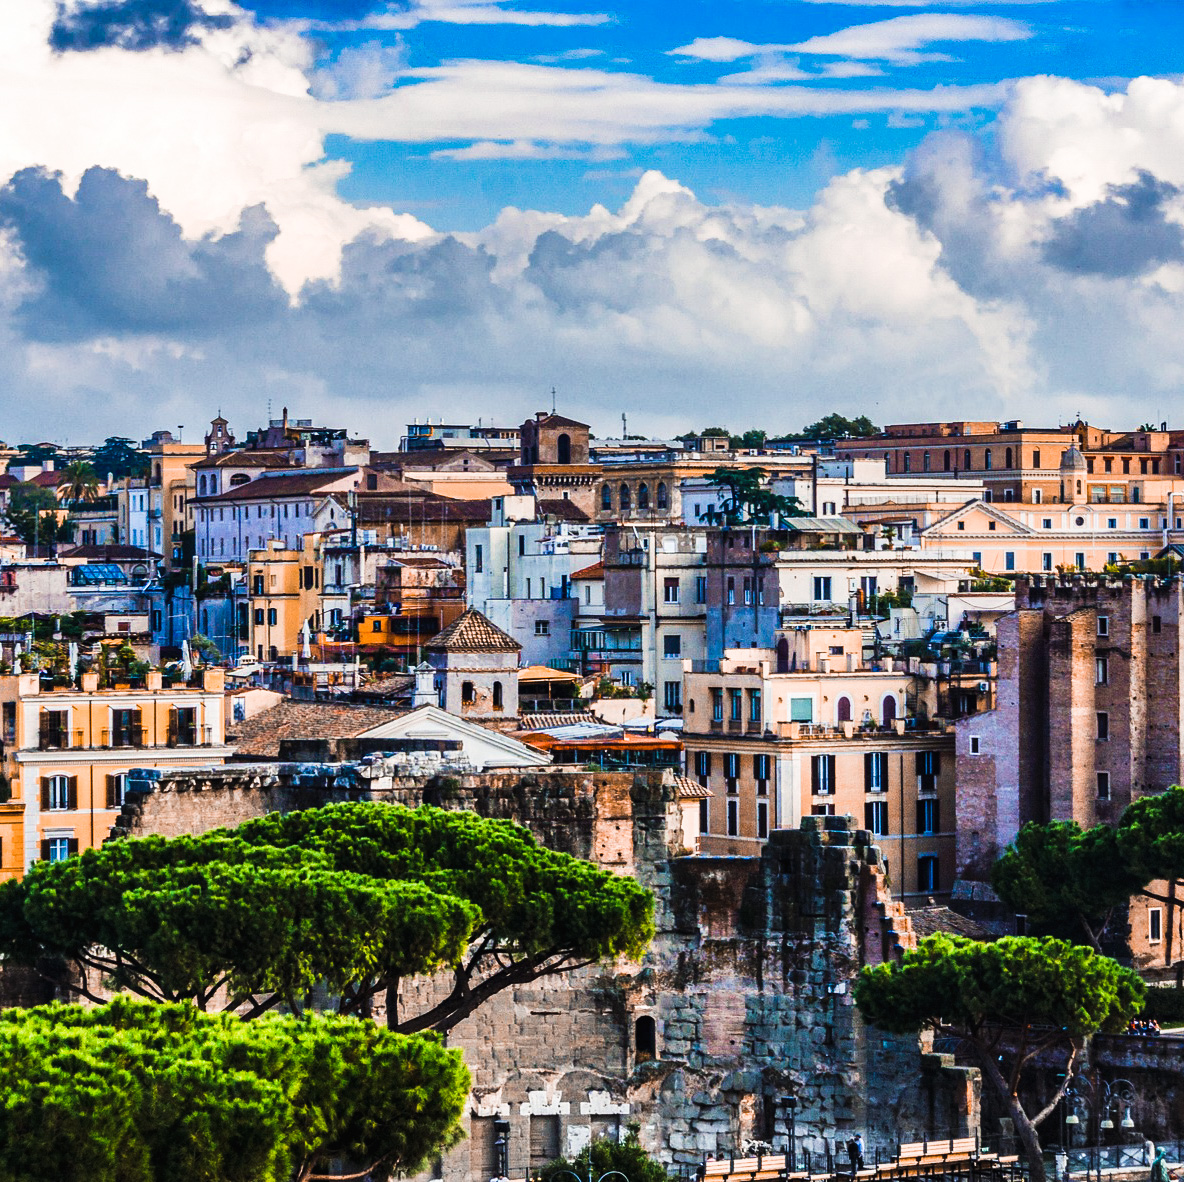 This is Spring... the 'roman' way: beautiful sunny days that can sudden take a turn for worse, and then clear out when the sun comes out again!
We love it! #springdaysinRome #weloverome❤️ #sunnydaysinrome 
Image credits: udo - from pixabay.com